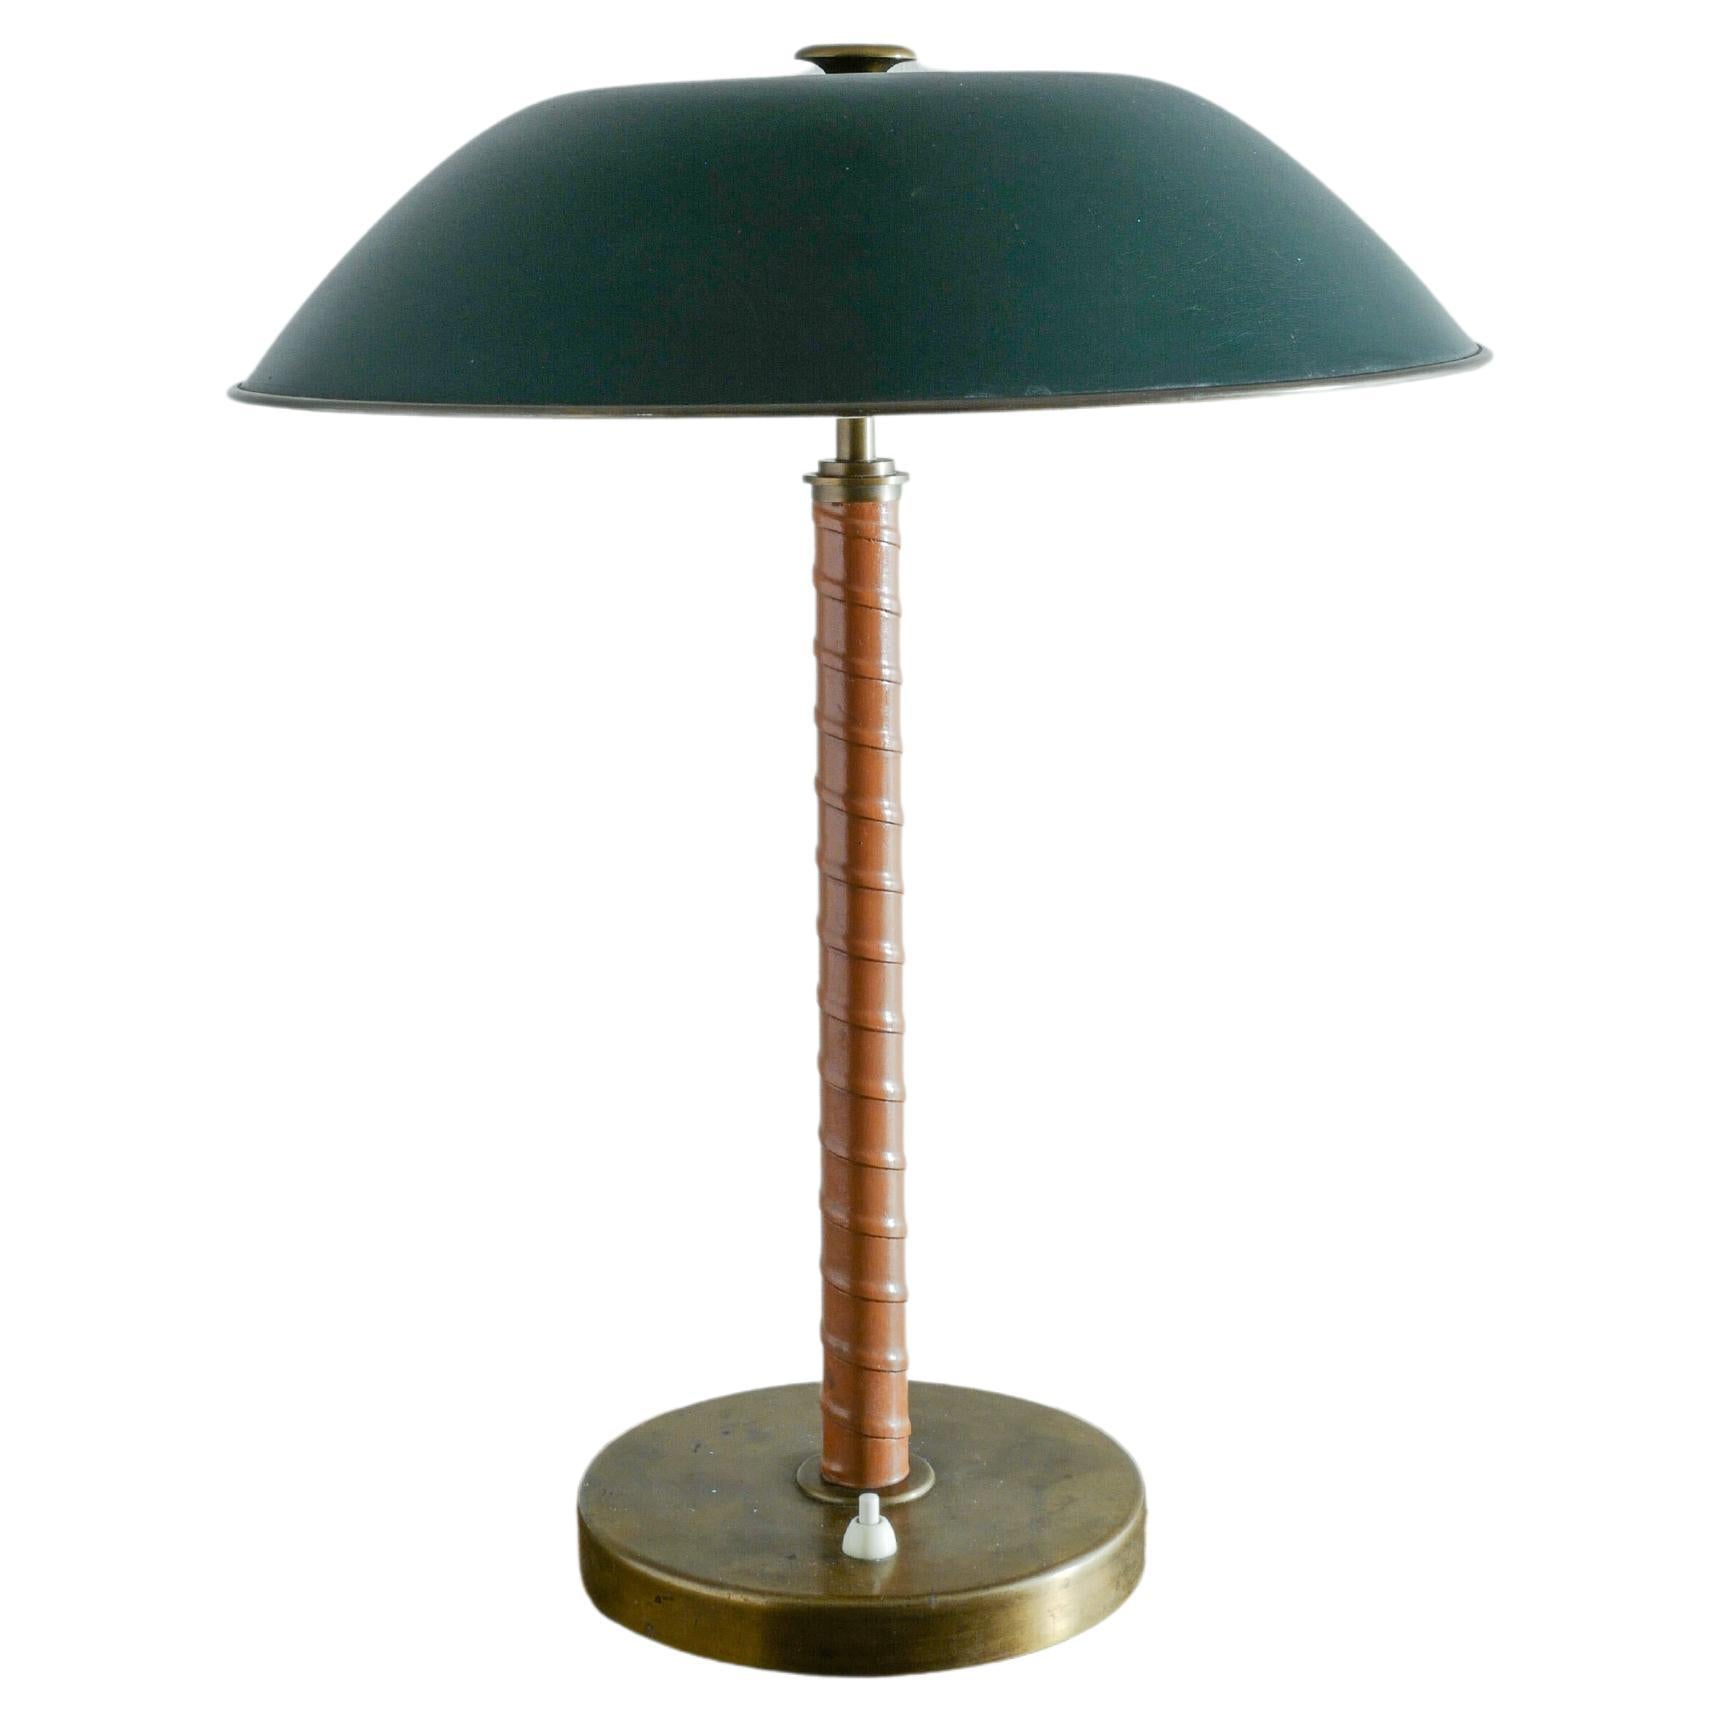 Einar Bäckström Table Lamp in Brass and Leather with a Dark Green Shade, 1940s